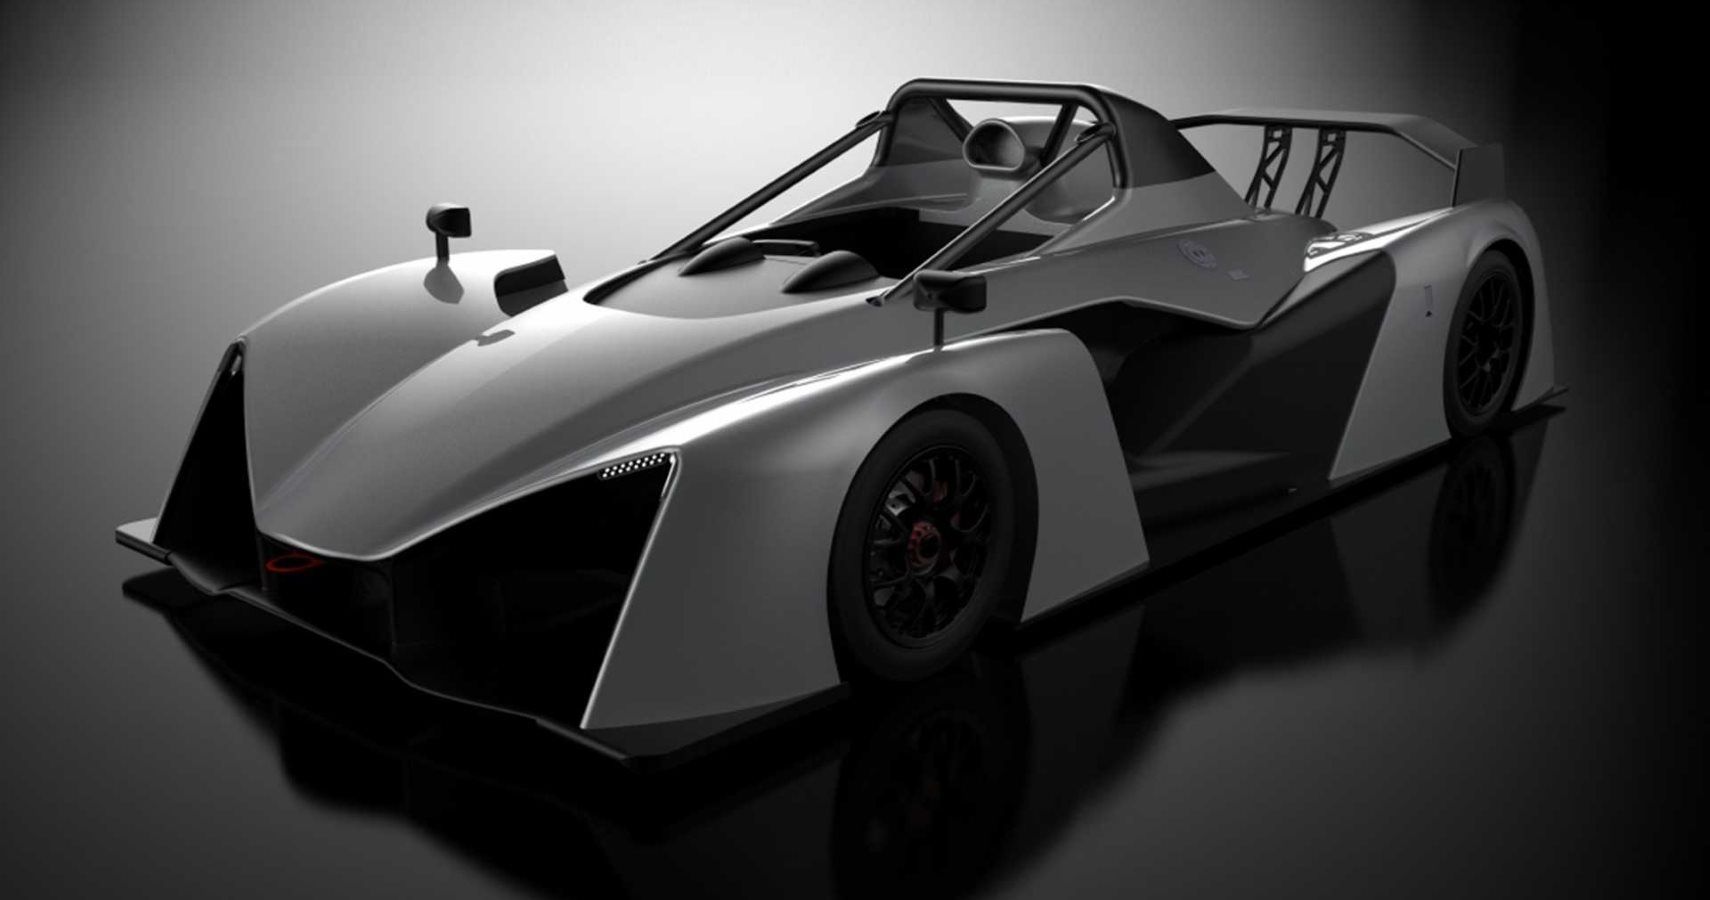 Check Out The Revolution: The Newest Ford V6-Powered Race Car